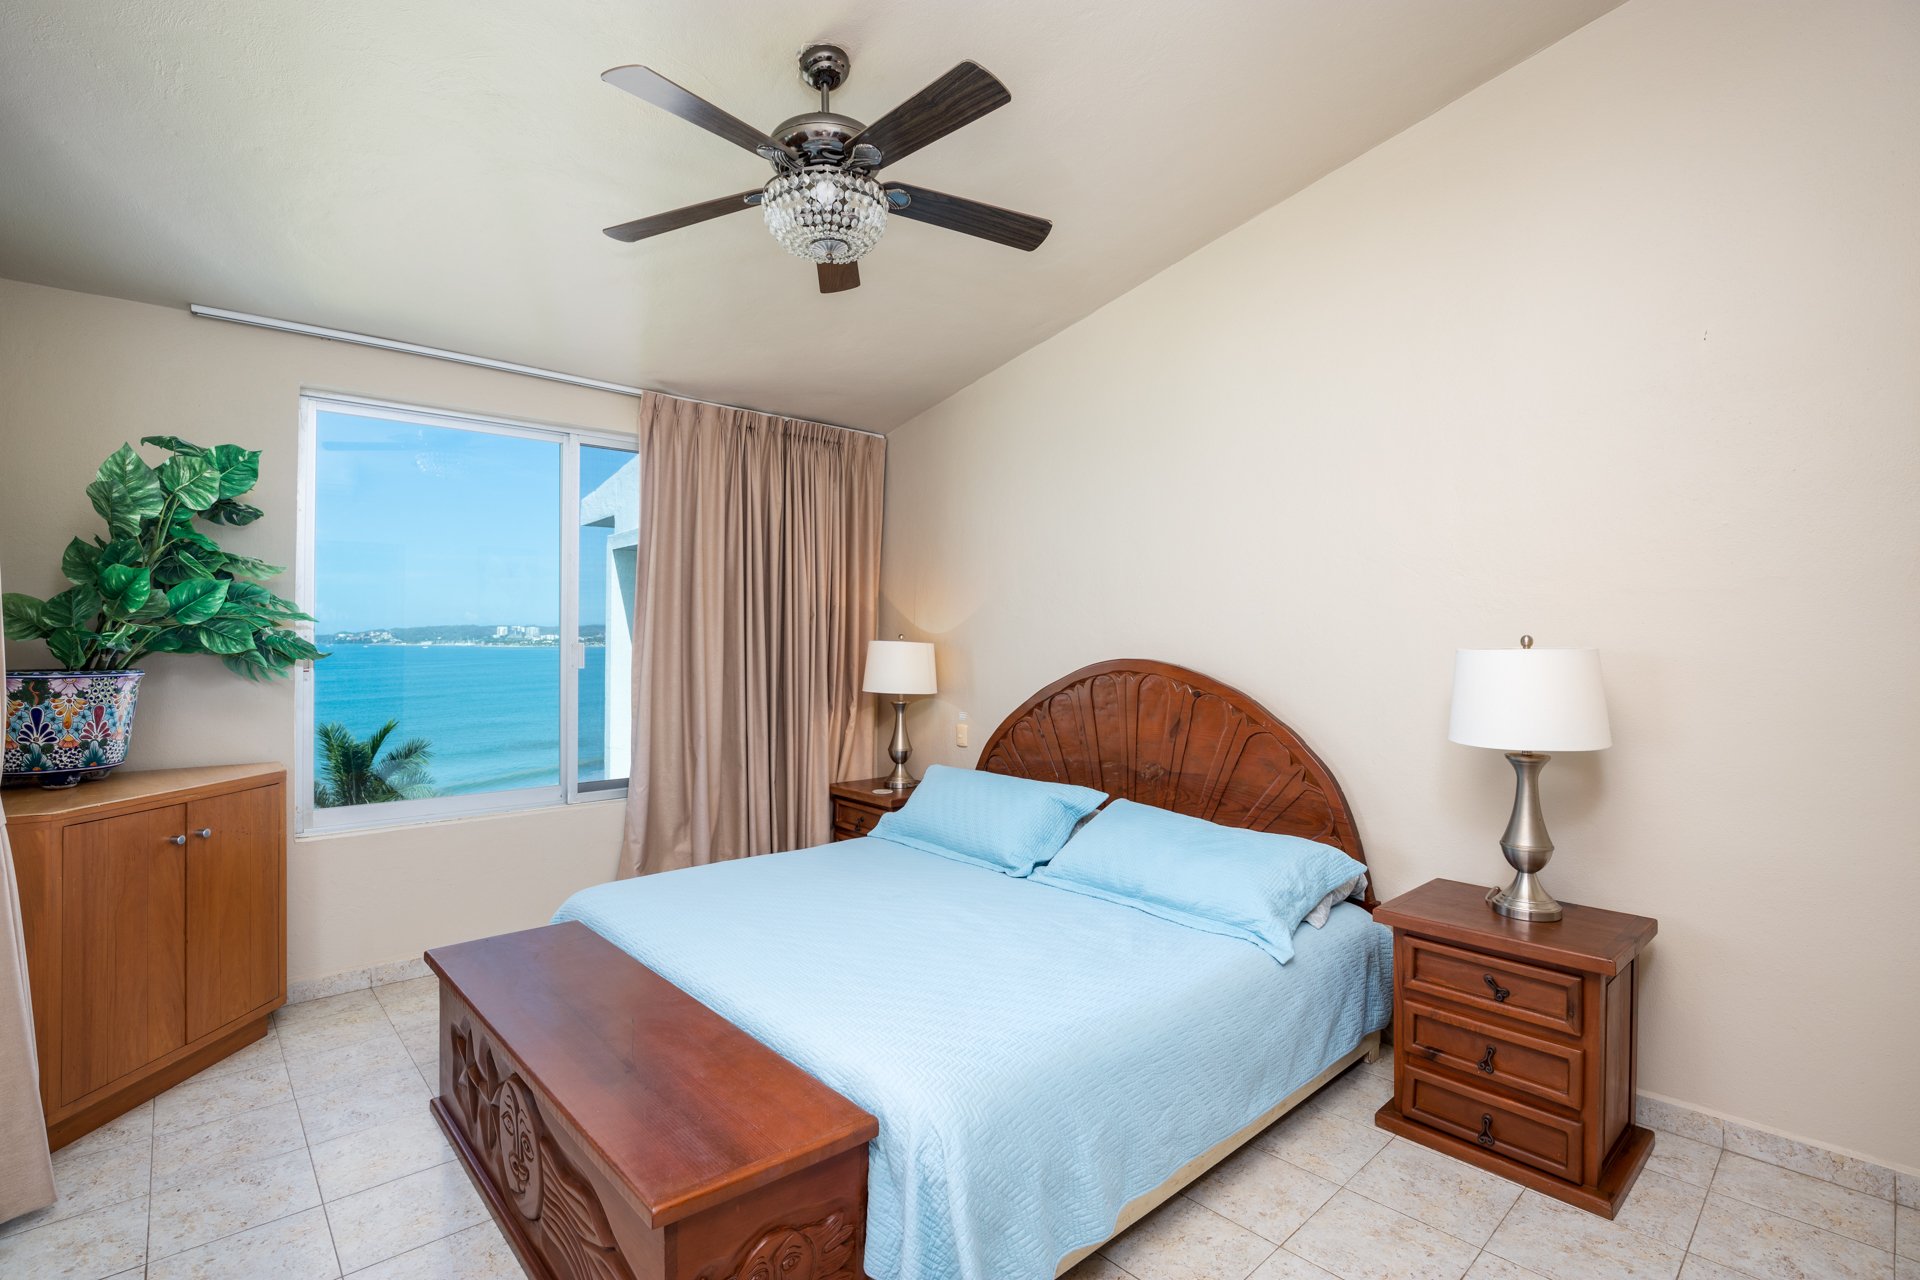 View of the Master Bedroom. With an spectacular view of the ocean.